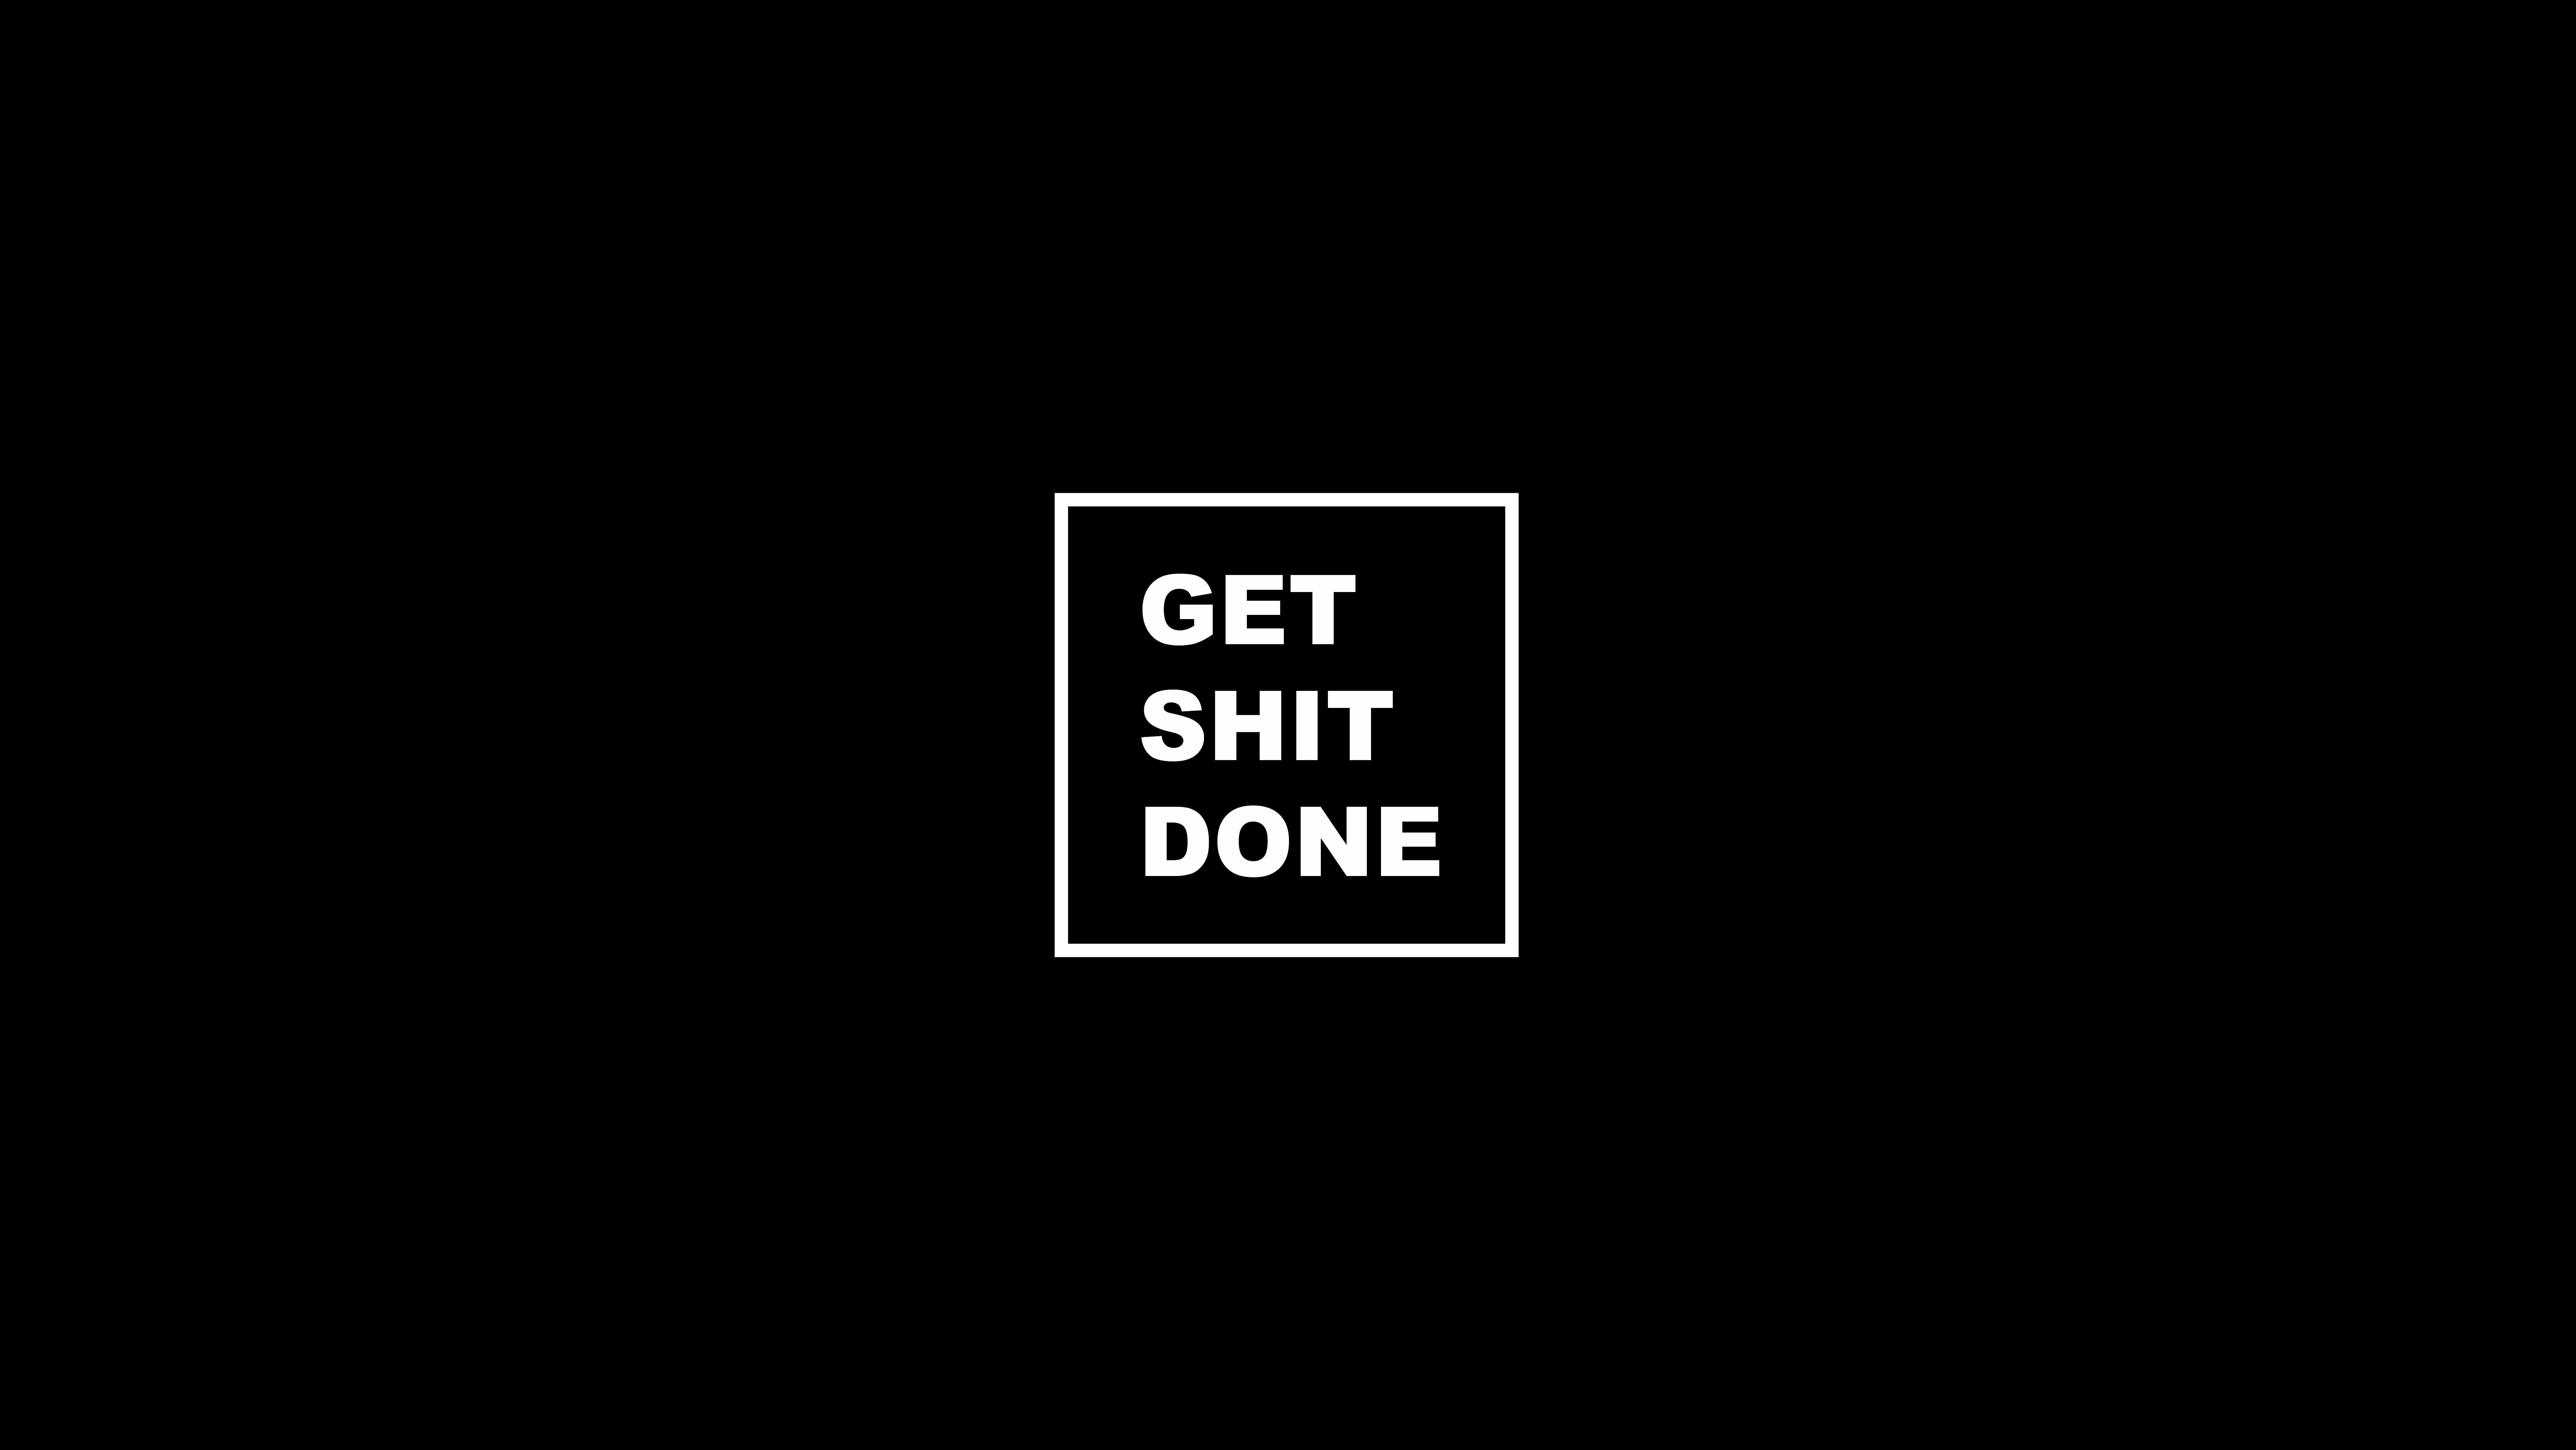 Wallpaper : 1920x1080 px, minimalism, motivational, quote, simple  background 1920x1080 - wallhaven - 1324859 - HD Wallpapers - WallHere